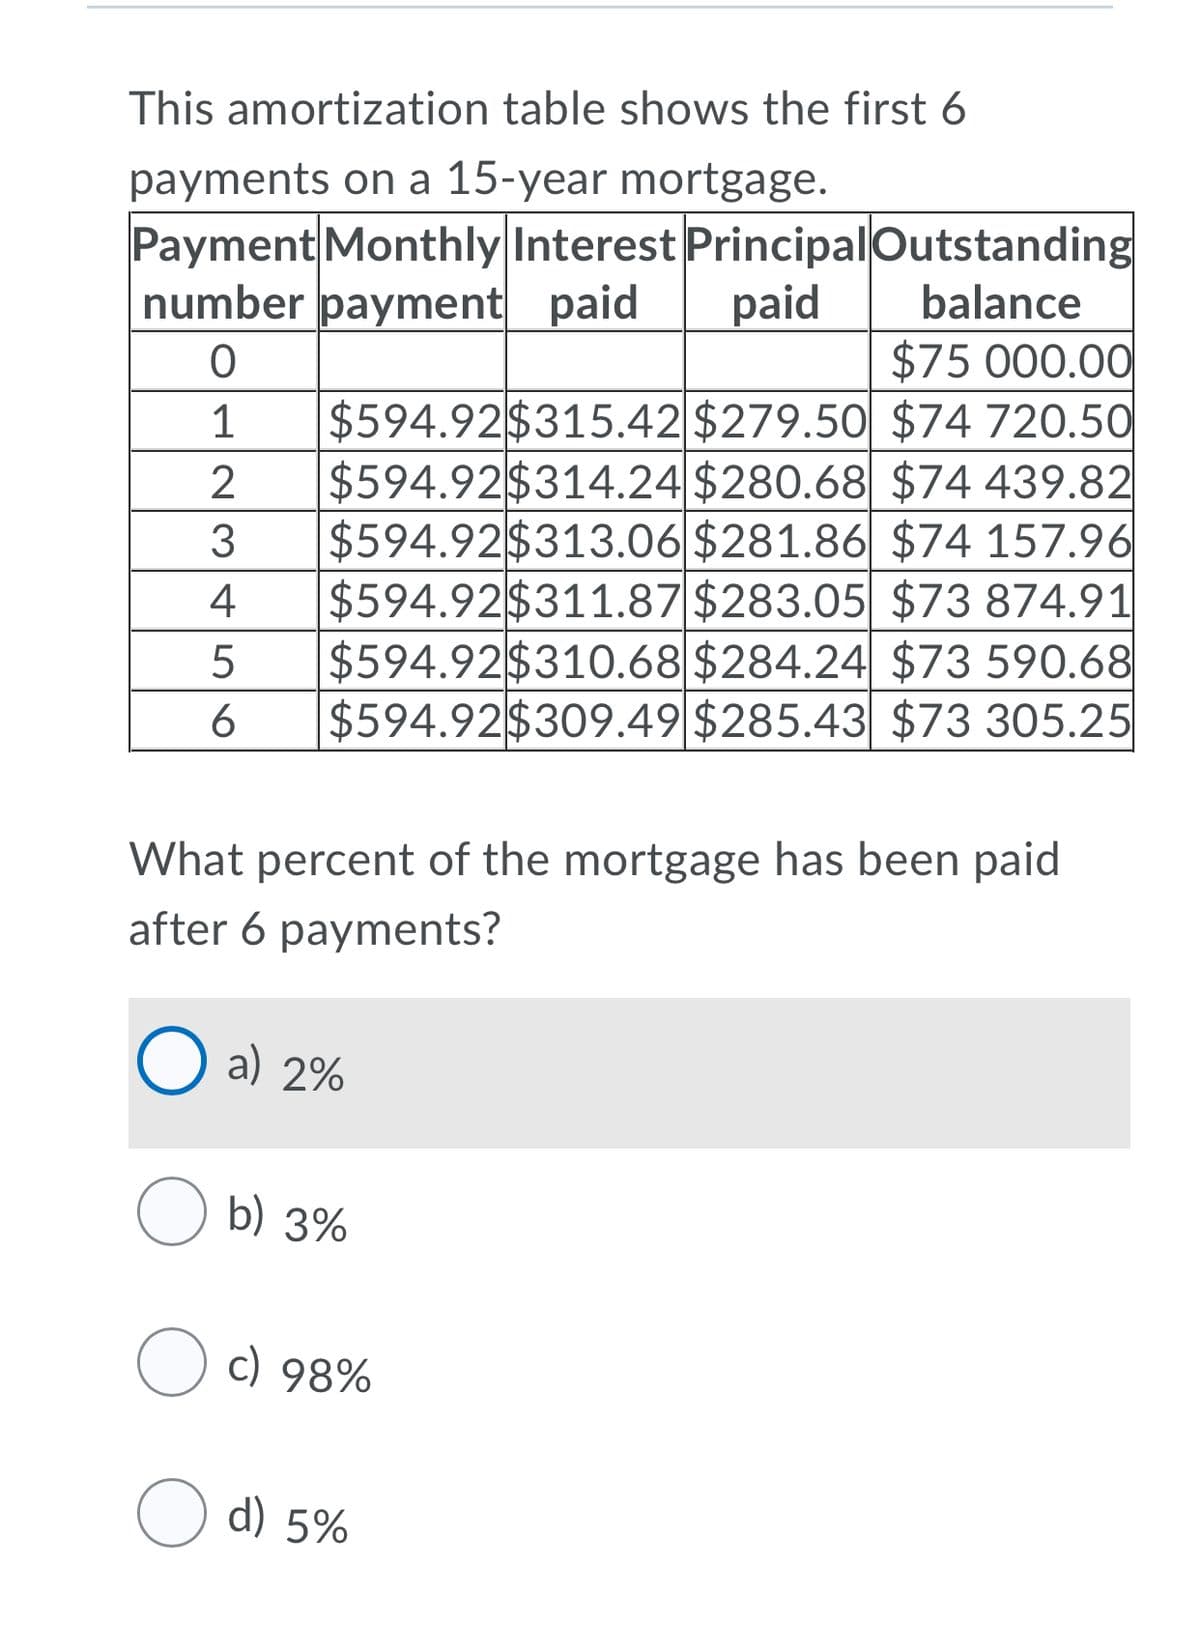 This amortization table shows the first 6
payments on a 15-year mortgage.
Payment Monthly Interest PrincipalOutstanding
number payment paid
paid
balance
$75 000.00
$594.92$315.42 $279.50 $74 720.50
$594.92$314.24 $280.68 $74 439.82
$594.92$313.06 $281.86 $74 157.96
$594.92$311.87 $283.05 $73 874.91
$594.92$310.68 $284.24 $73 590.68
$594.92$309.49 $285.43| $73 305.25
1
2
3
4
What percent of the mortgage has been paid
after 6 payments?
a) 2%
O b) 3%
O c) 98%
O d) 5%
